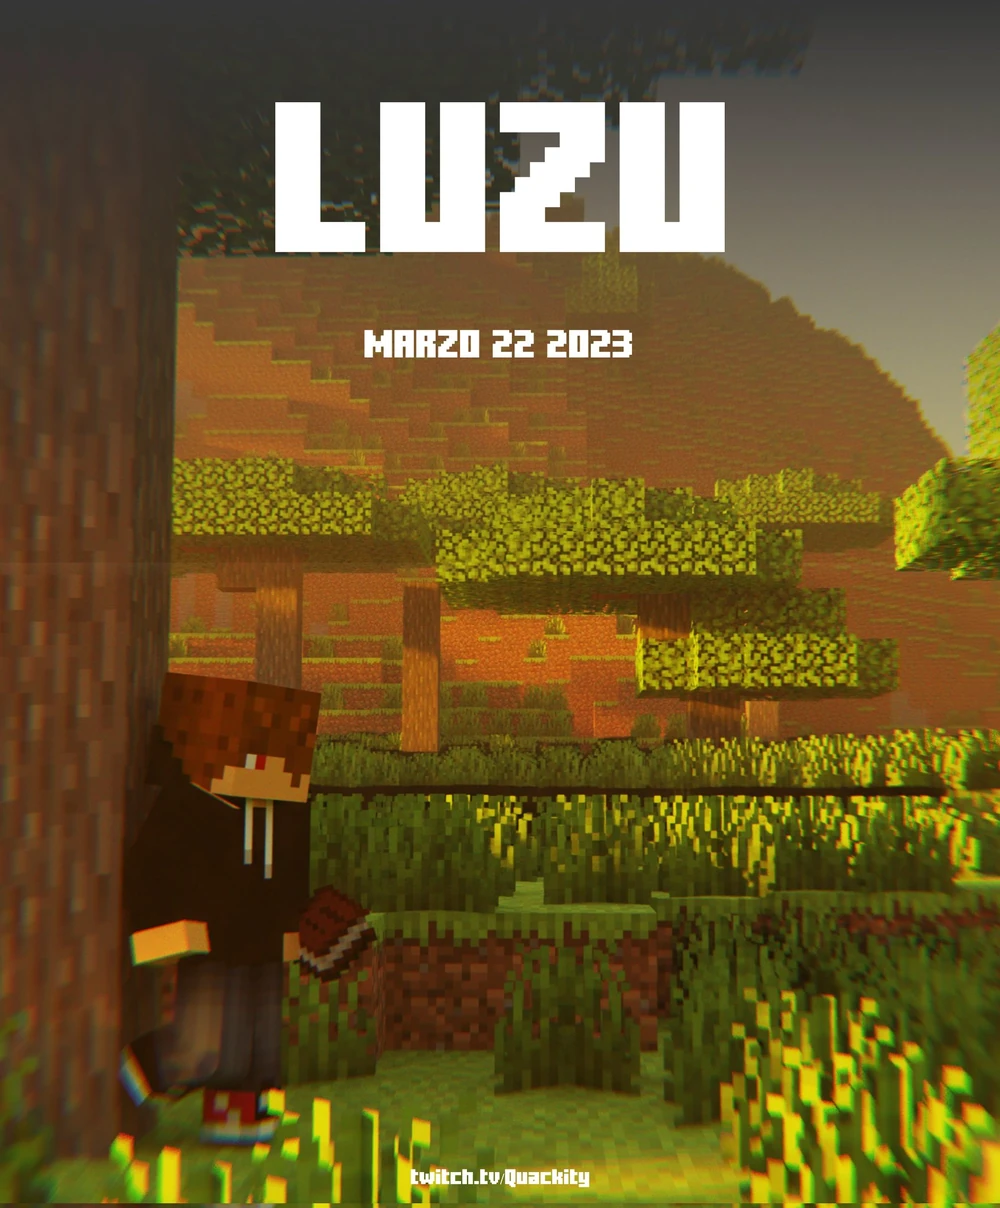 Official announcement poster for Luzu. He stands off to the side in a oak tree forest with his back to a tree and one leg resting up against it. He holds a brown book.